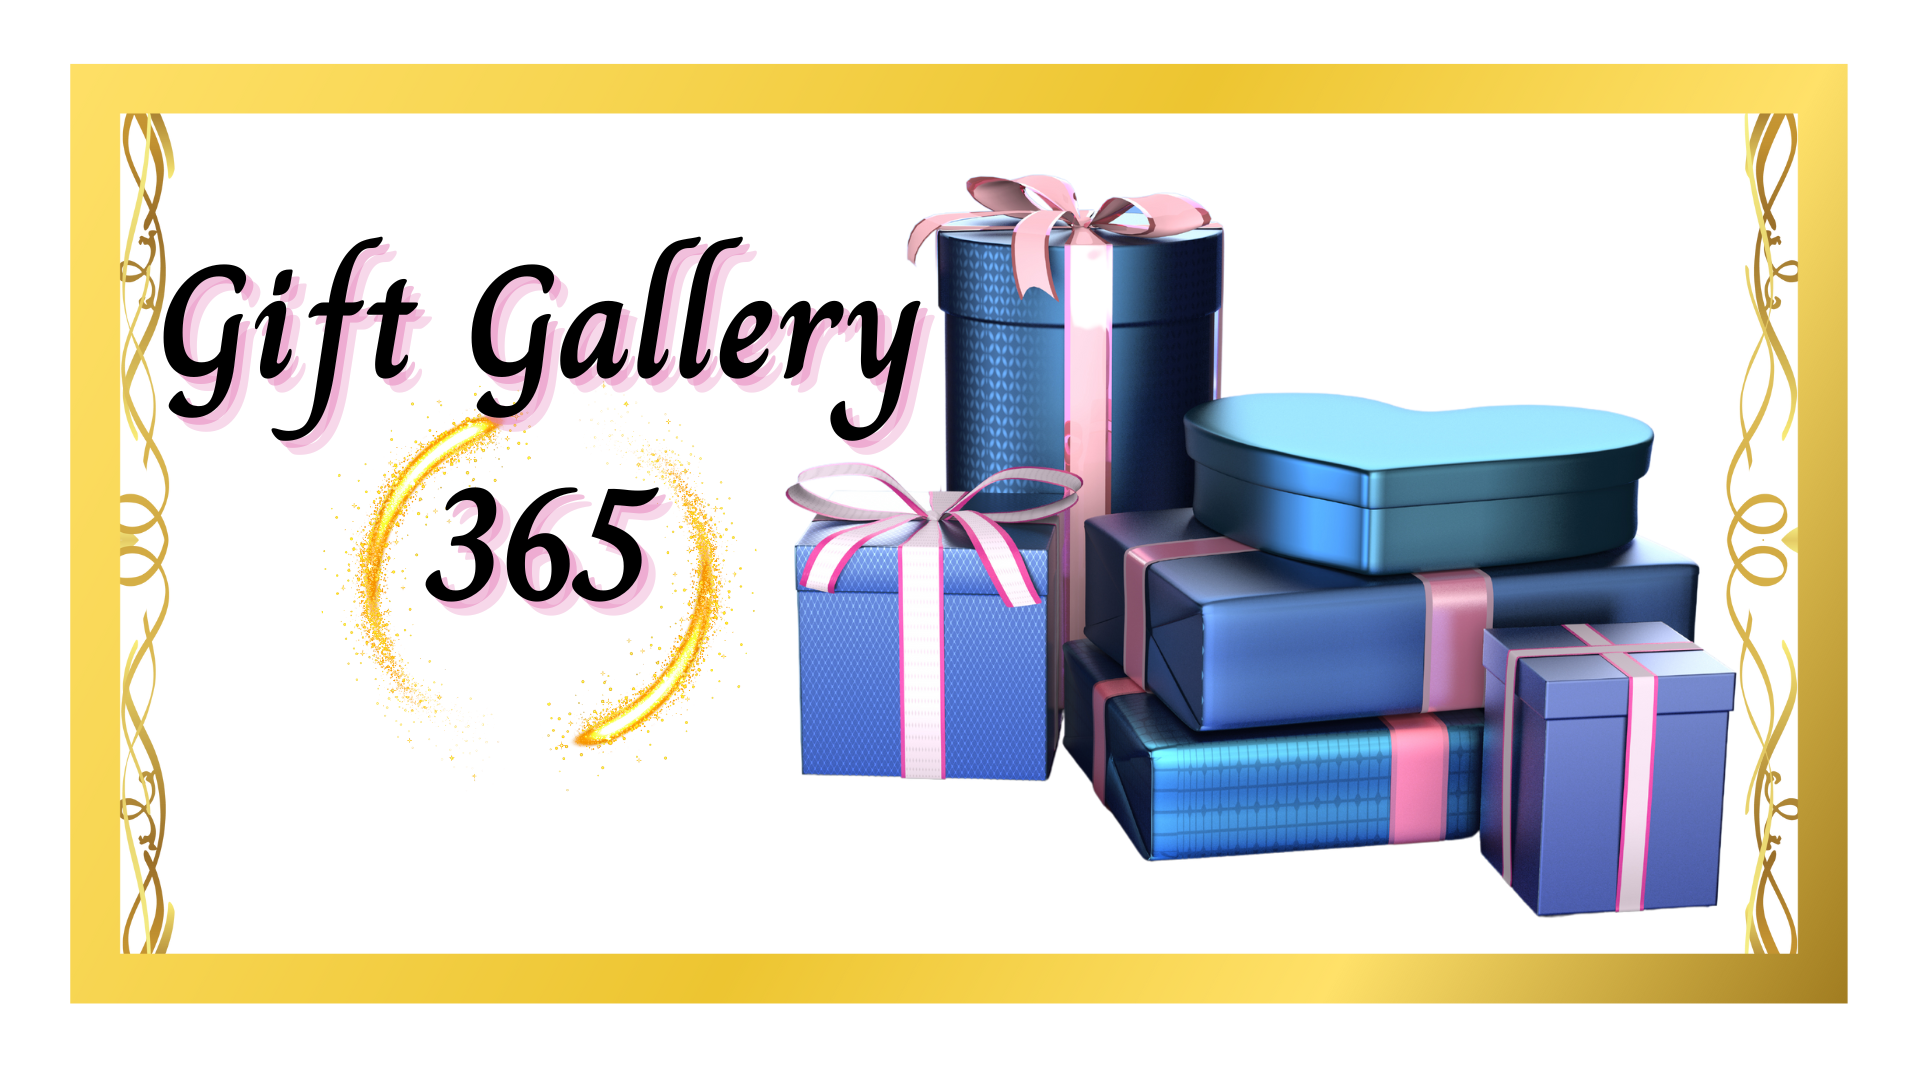 Gift Gallery 365